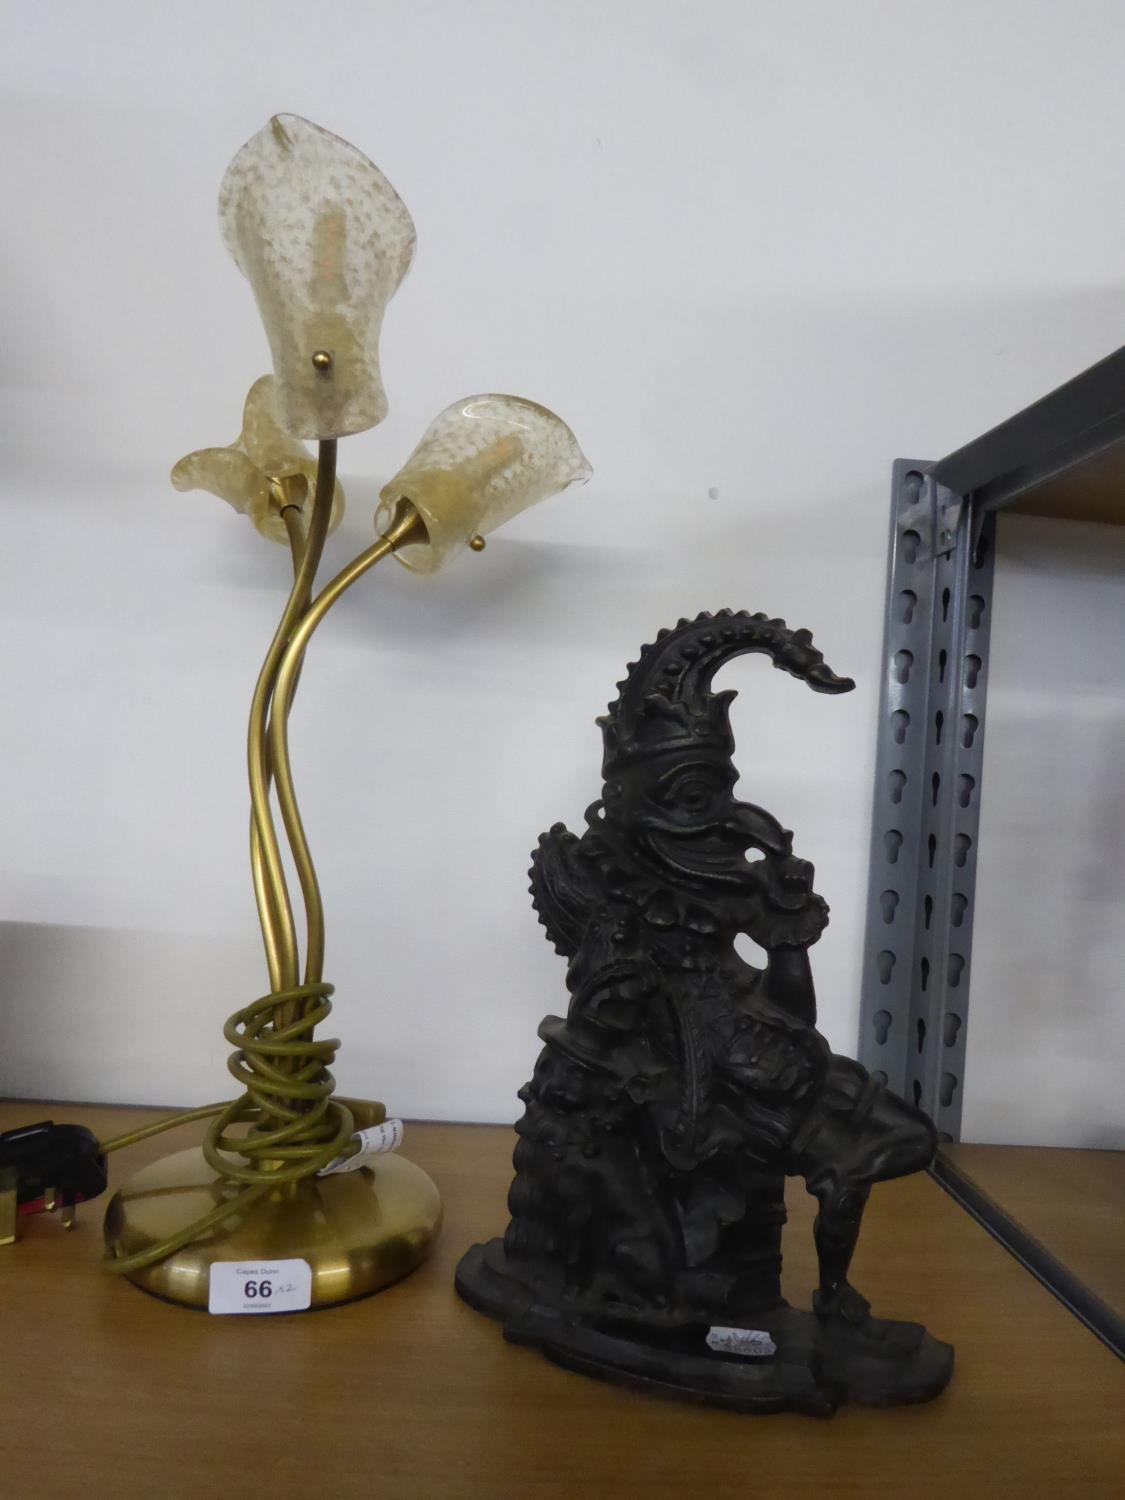 BLACK CAST IRON MR PUNCH DOORSTOP, 11 ½” (29.2m) high, together with a MODERN TABLE LAMP WITH